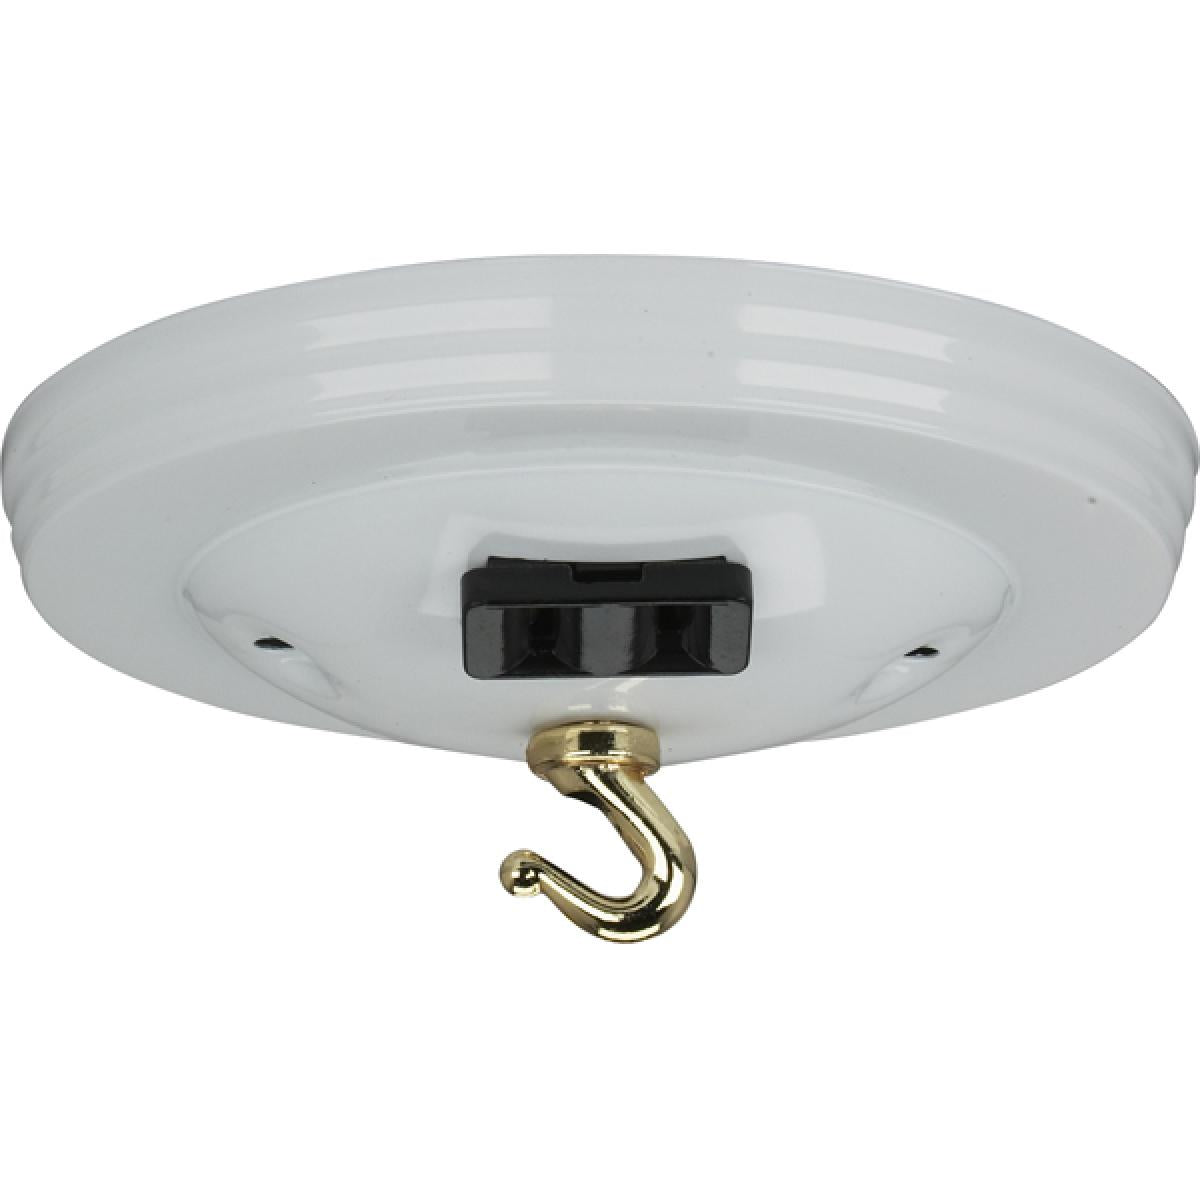 Satco 90-1072 Canopy Kit With Convenience Outlet White Finish 5" Diameter 7/16" Center Hole 2-8/32 Bar Holes Includes Hardware 10lbs Max